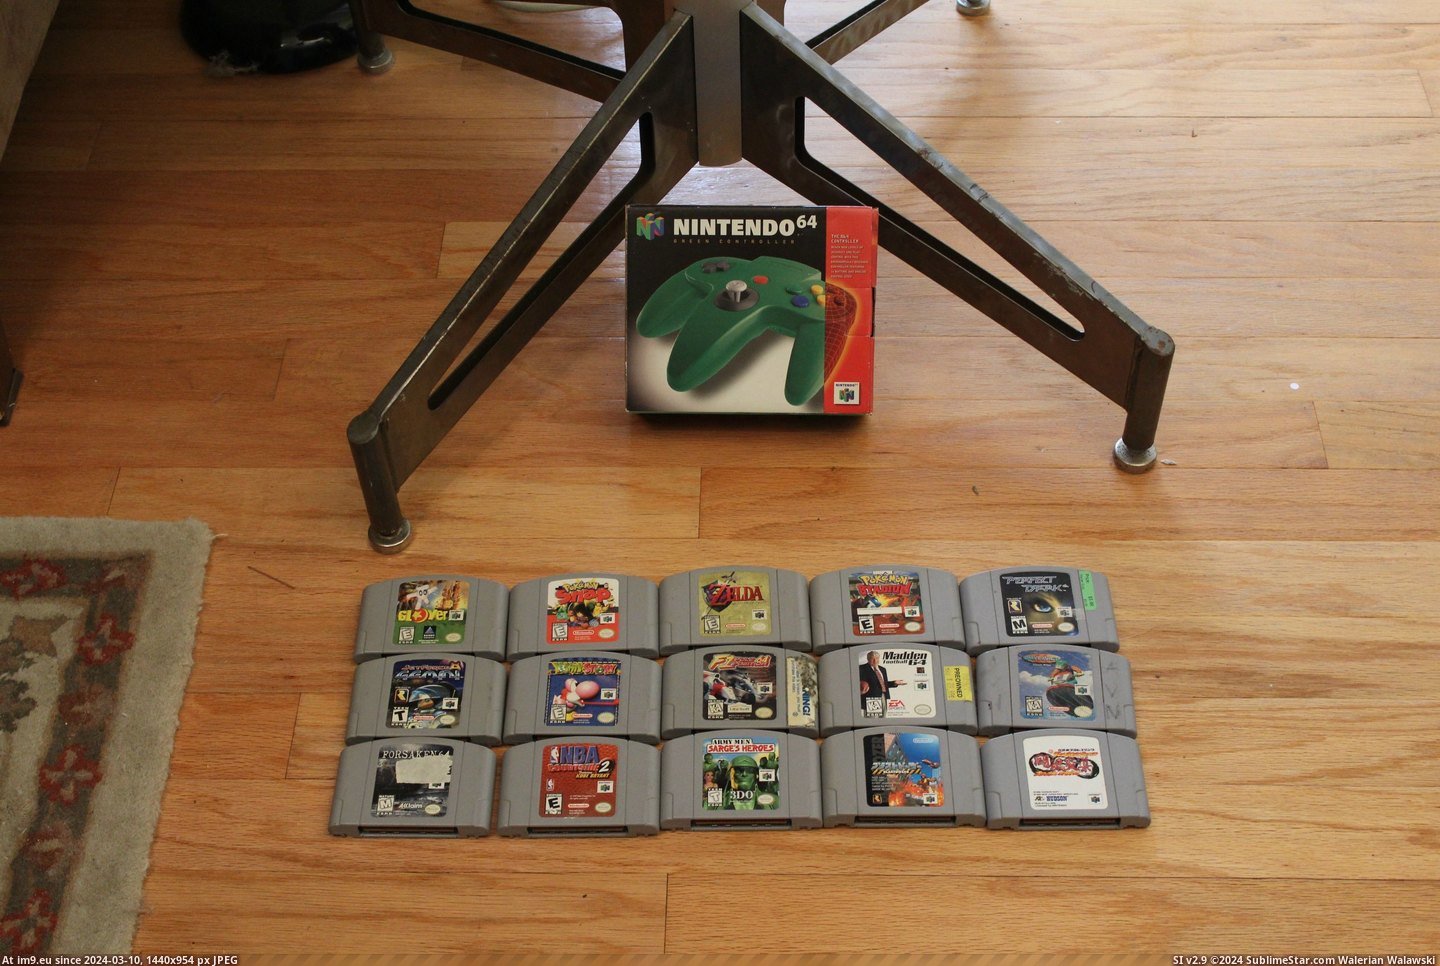 #Gaming #Year #Ago #Off #Demo #Craigslist #Unit #Rarest #Bought #Store #Own #N64 [Gaming] Bought a N64 Store Demo Unit off Craigslist 1 year ago. Probably the rarest thing I own. 6 Pic. (Изображение из альбом My r/GAMING favs))